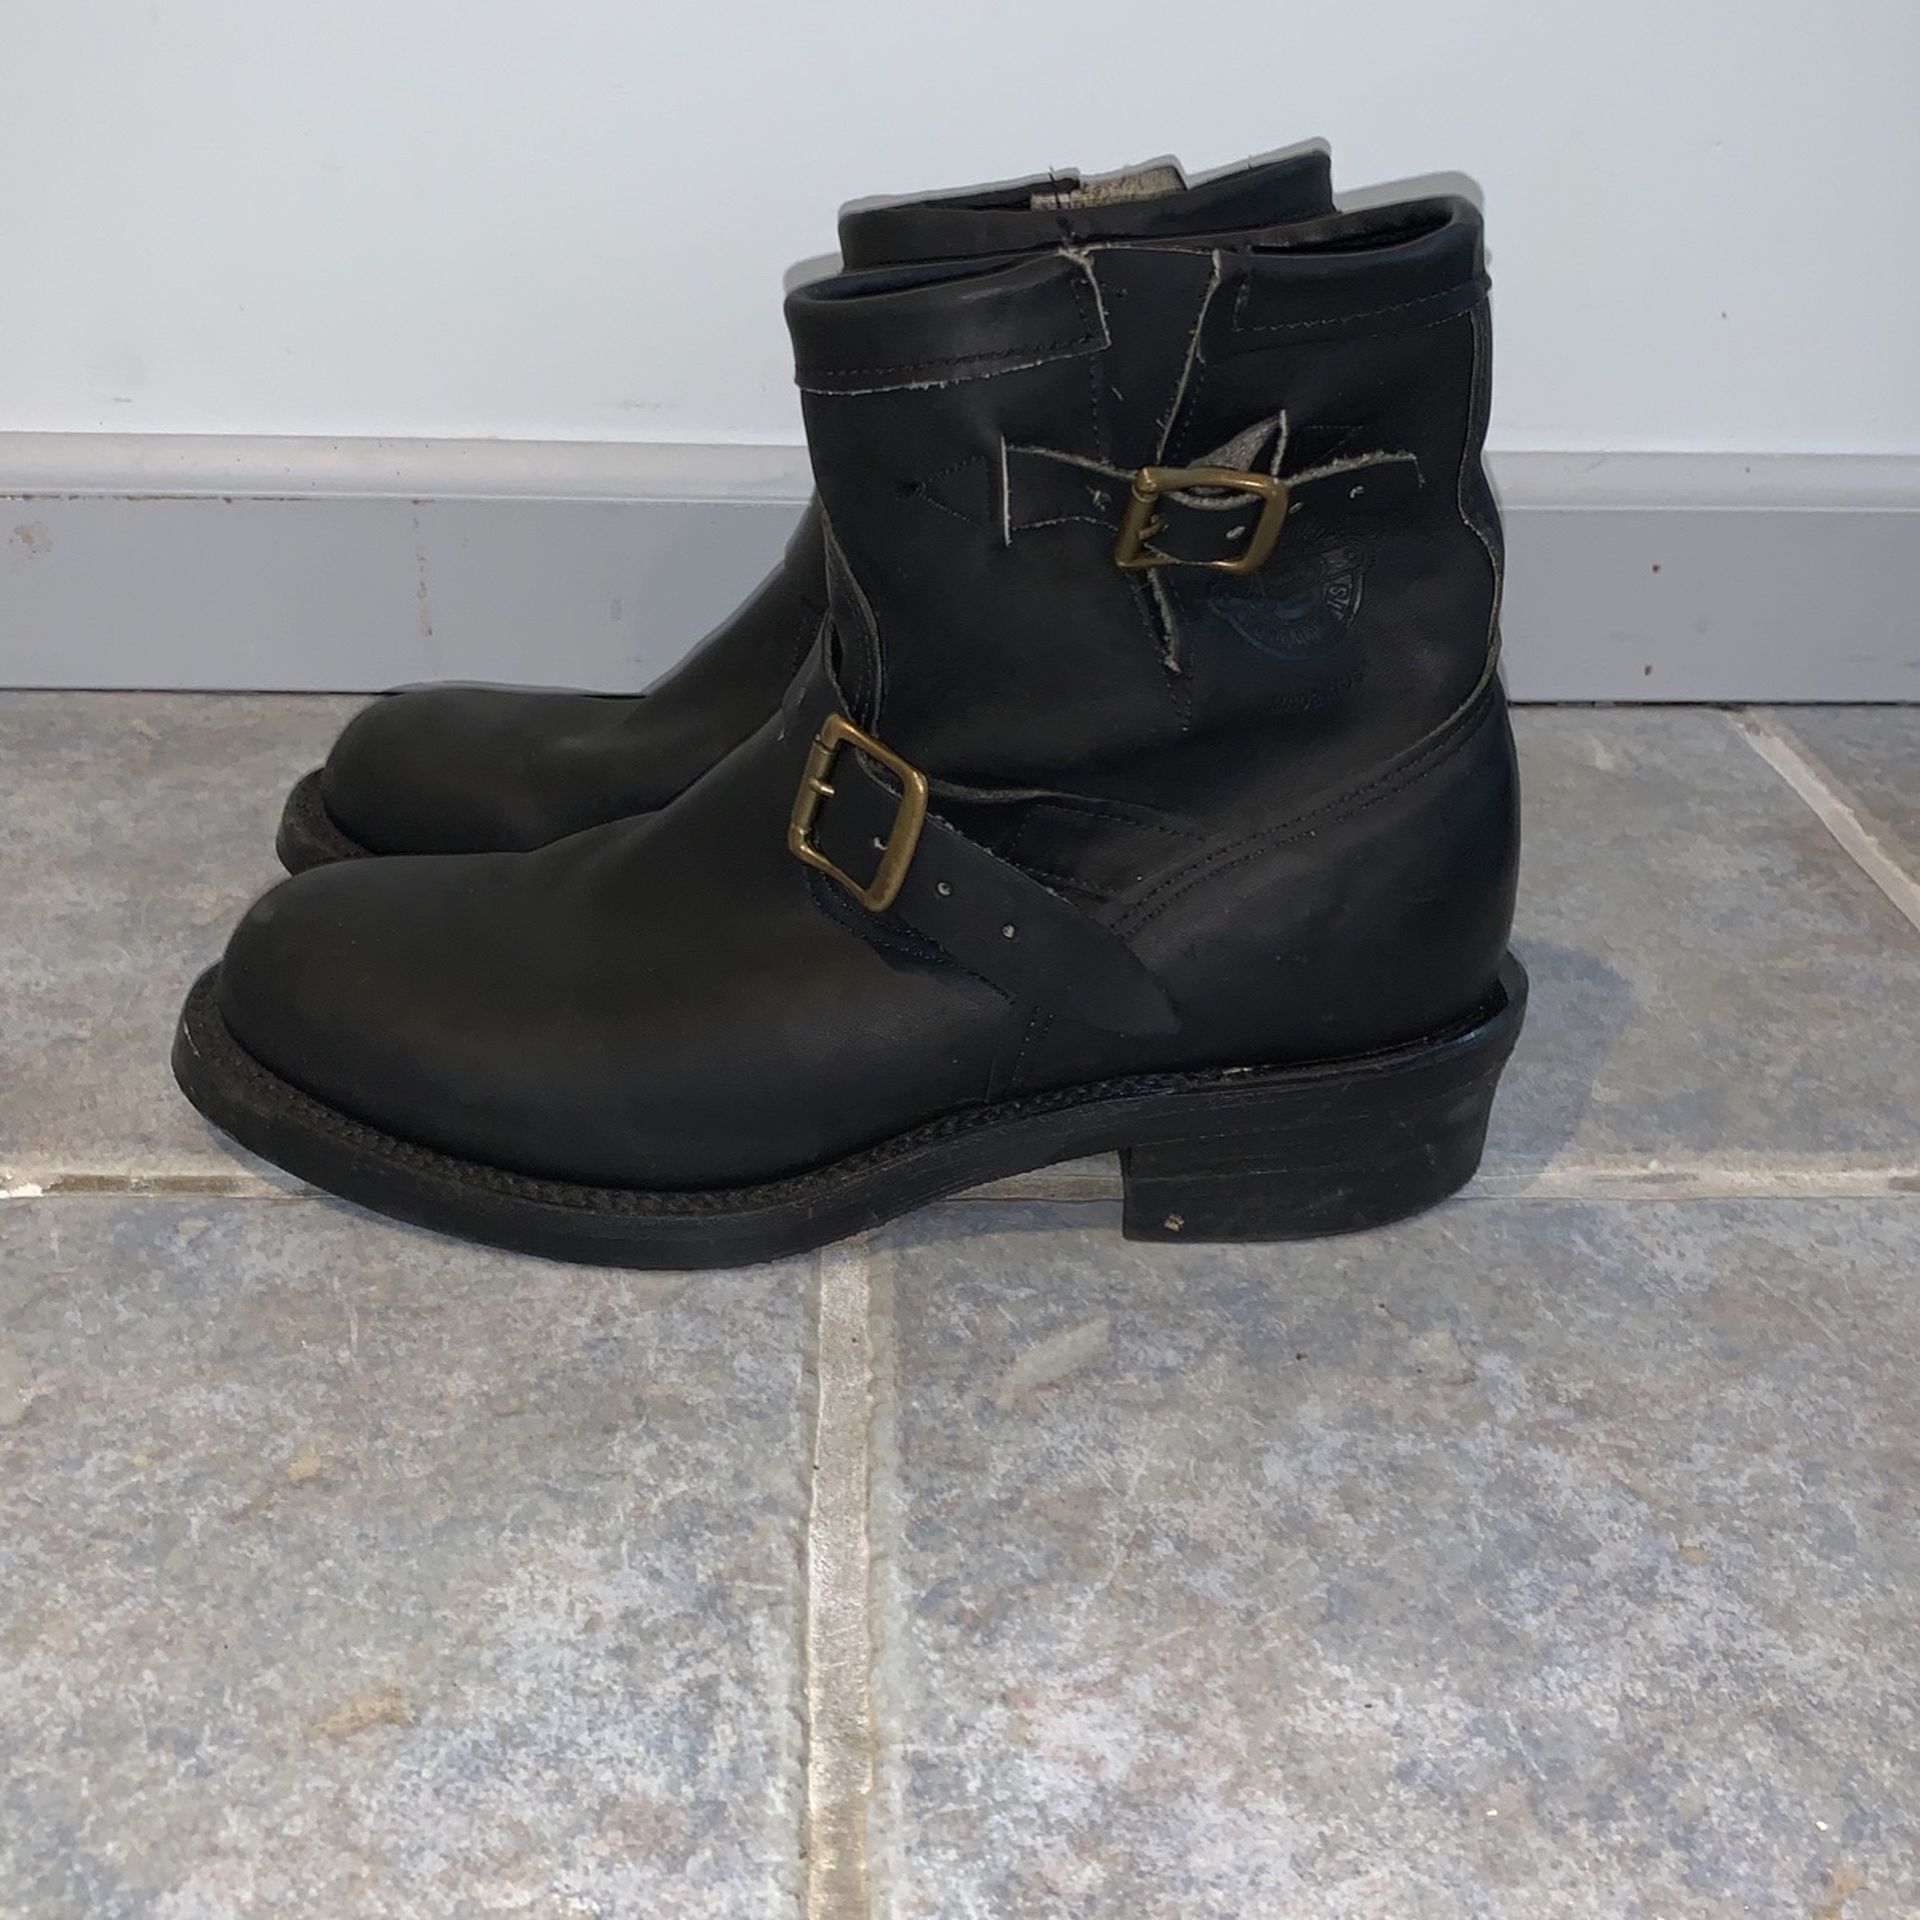 Justin Boots Work/ride Boots